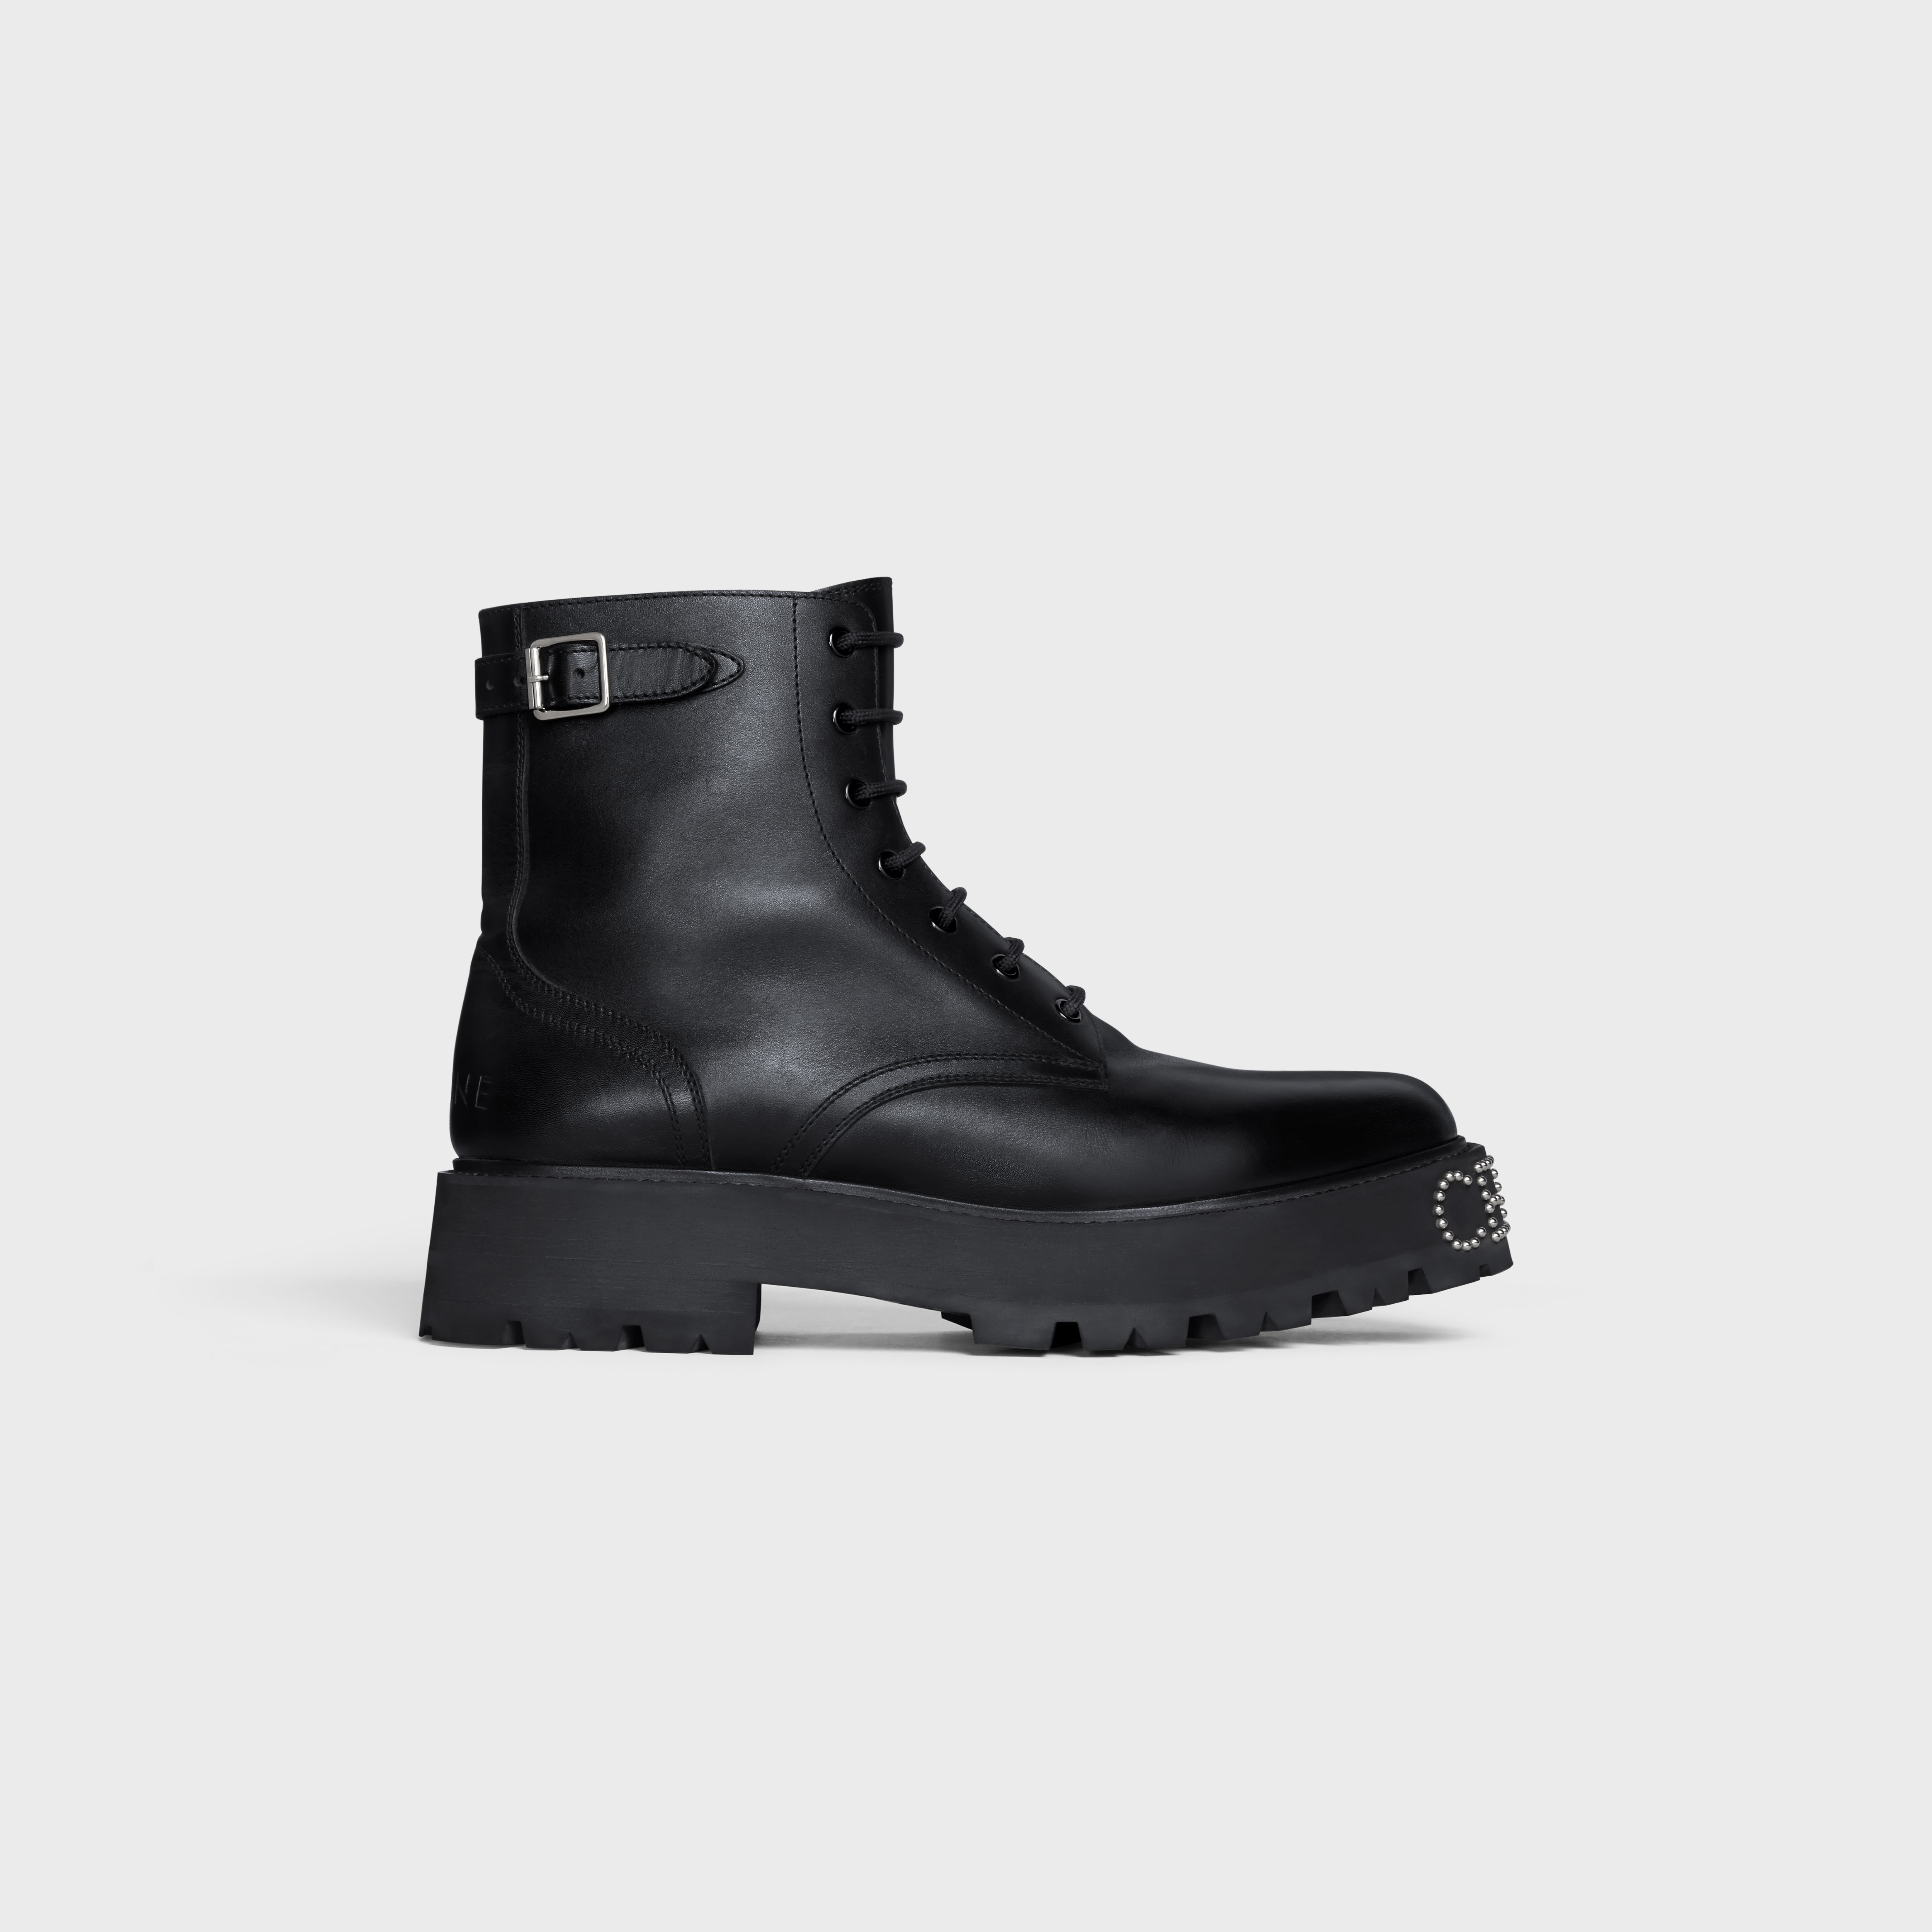 CELINE BULKY LACE-UP BOOT WITH STUDDED OUTSOLE in SHINY BULL - 1